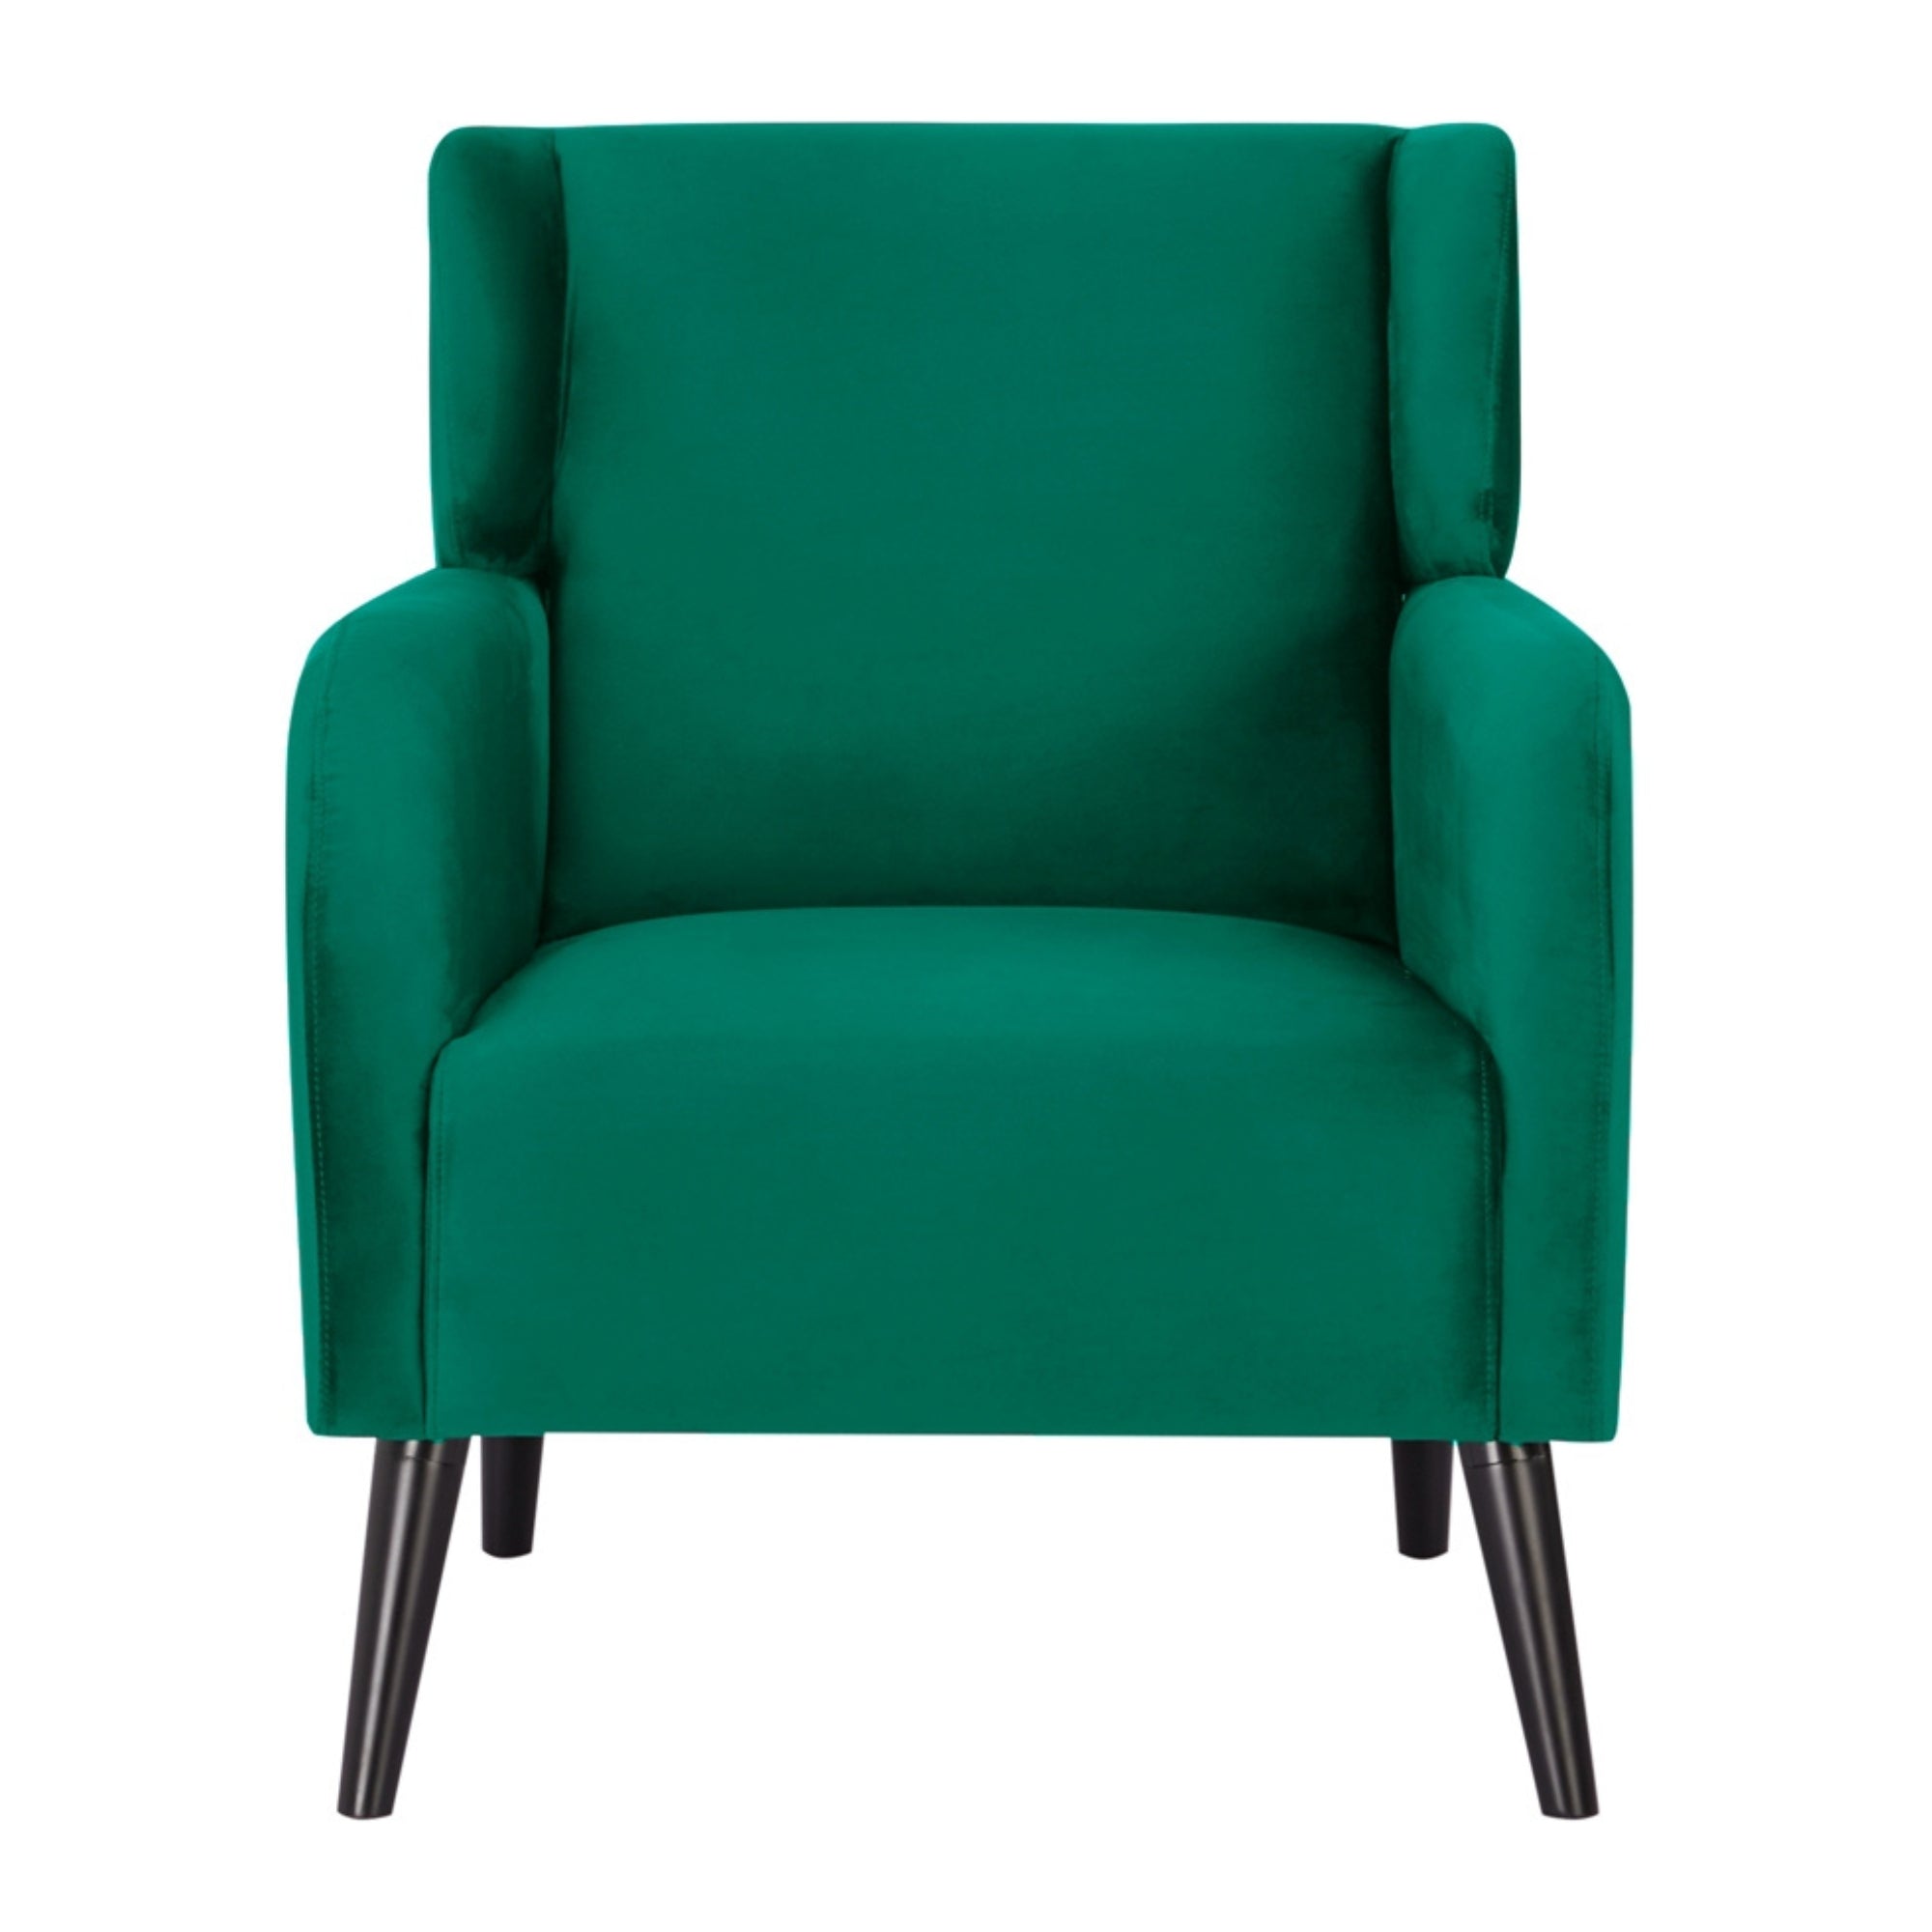 Plush Polyester Arm Chairs, Set of 2, Green, Wood Frame